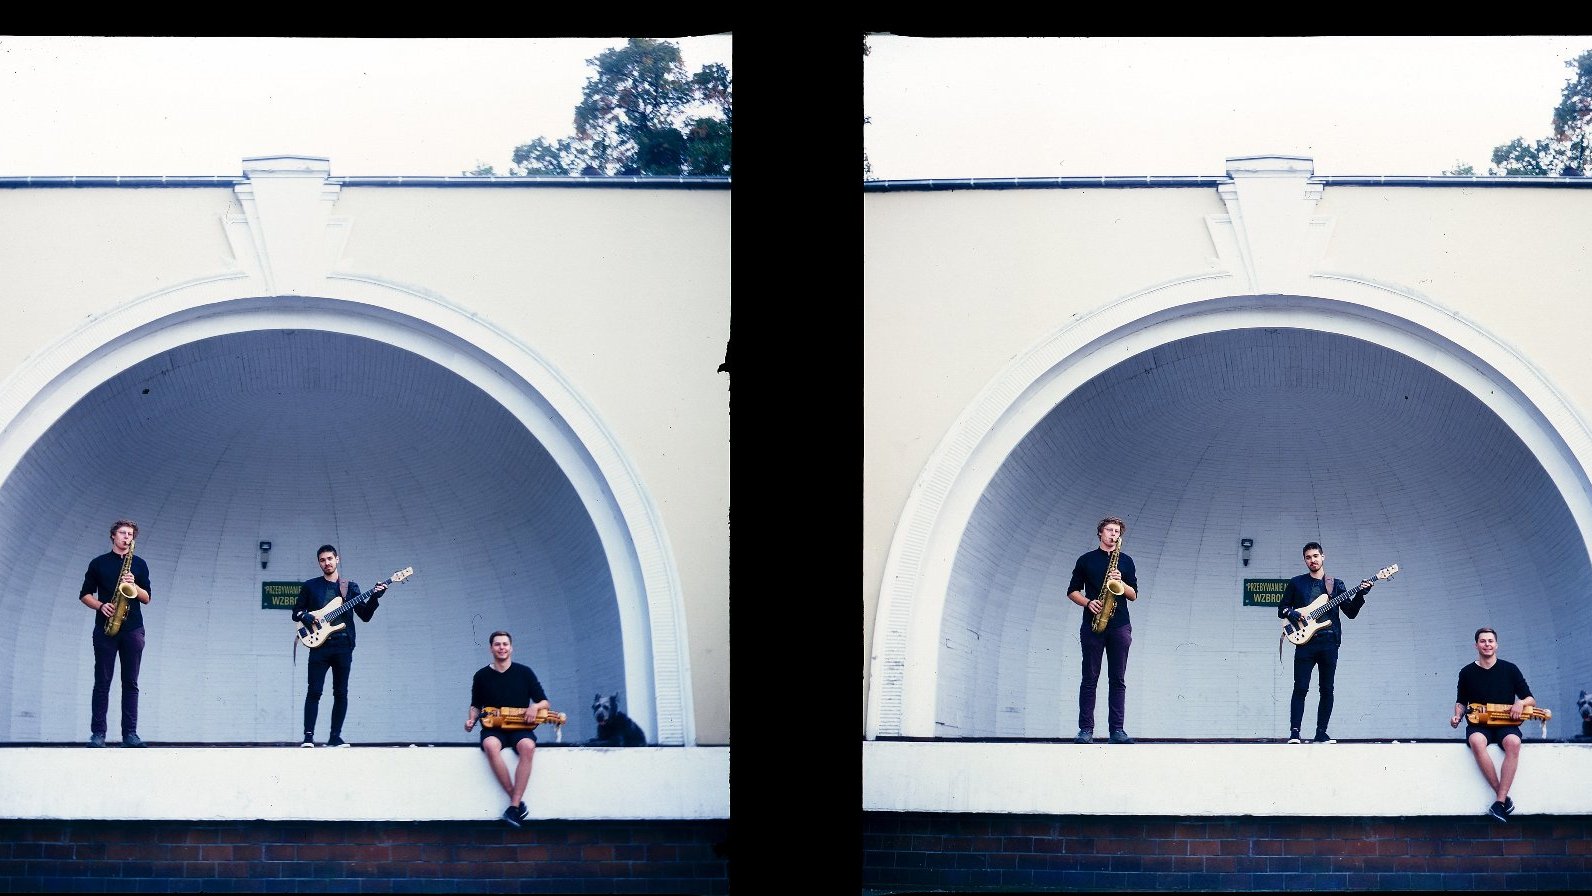 Stereoscopic photograph presenting three men playing instruments on bandshell stage; white background.